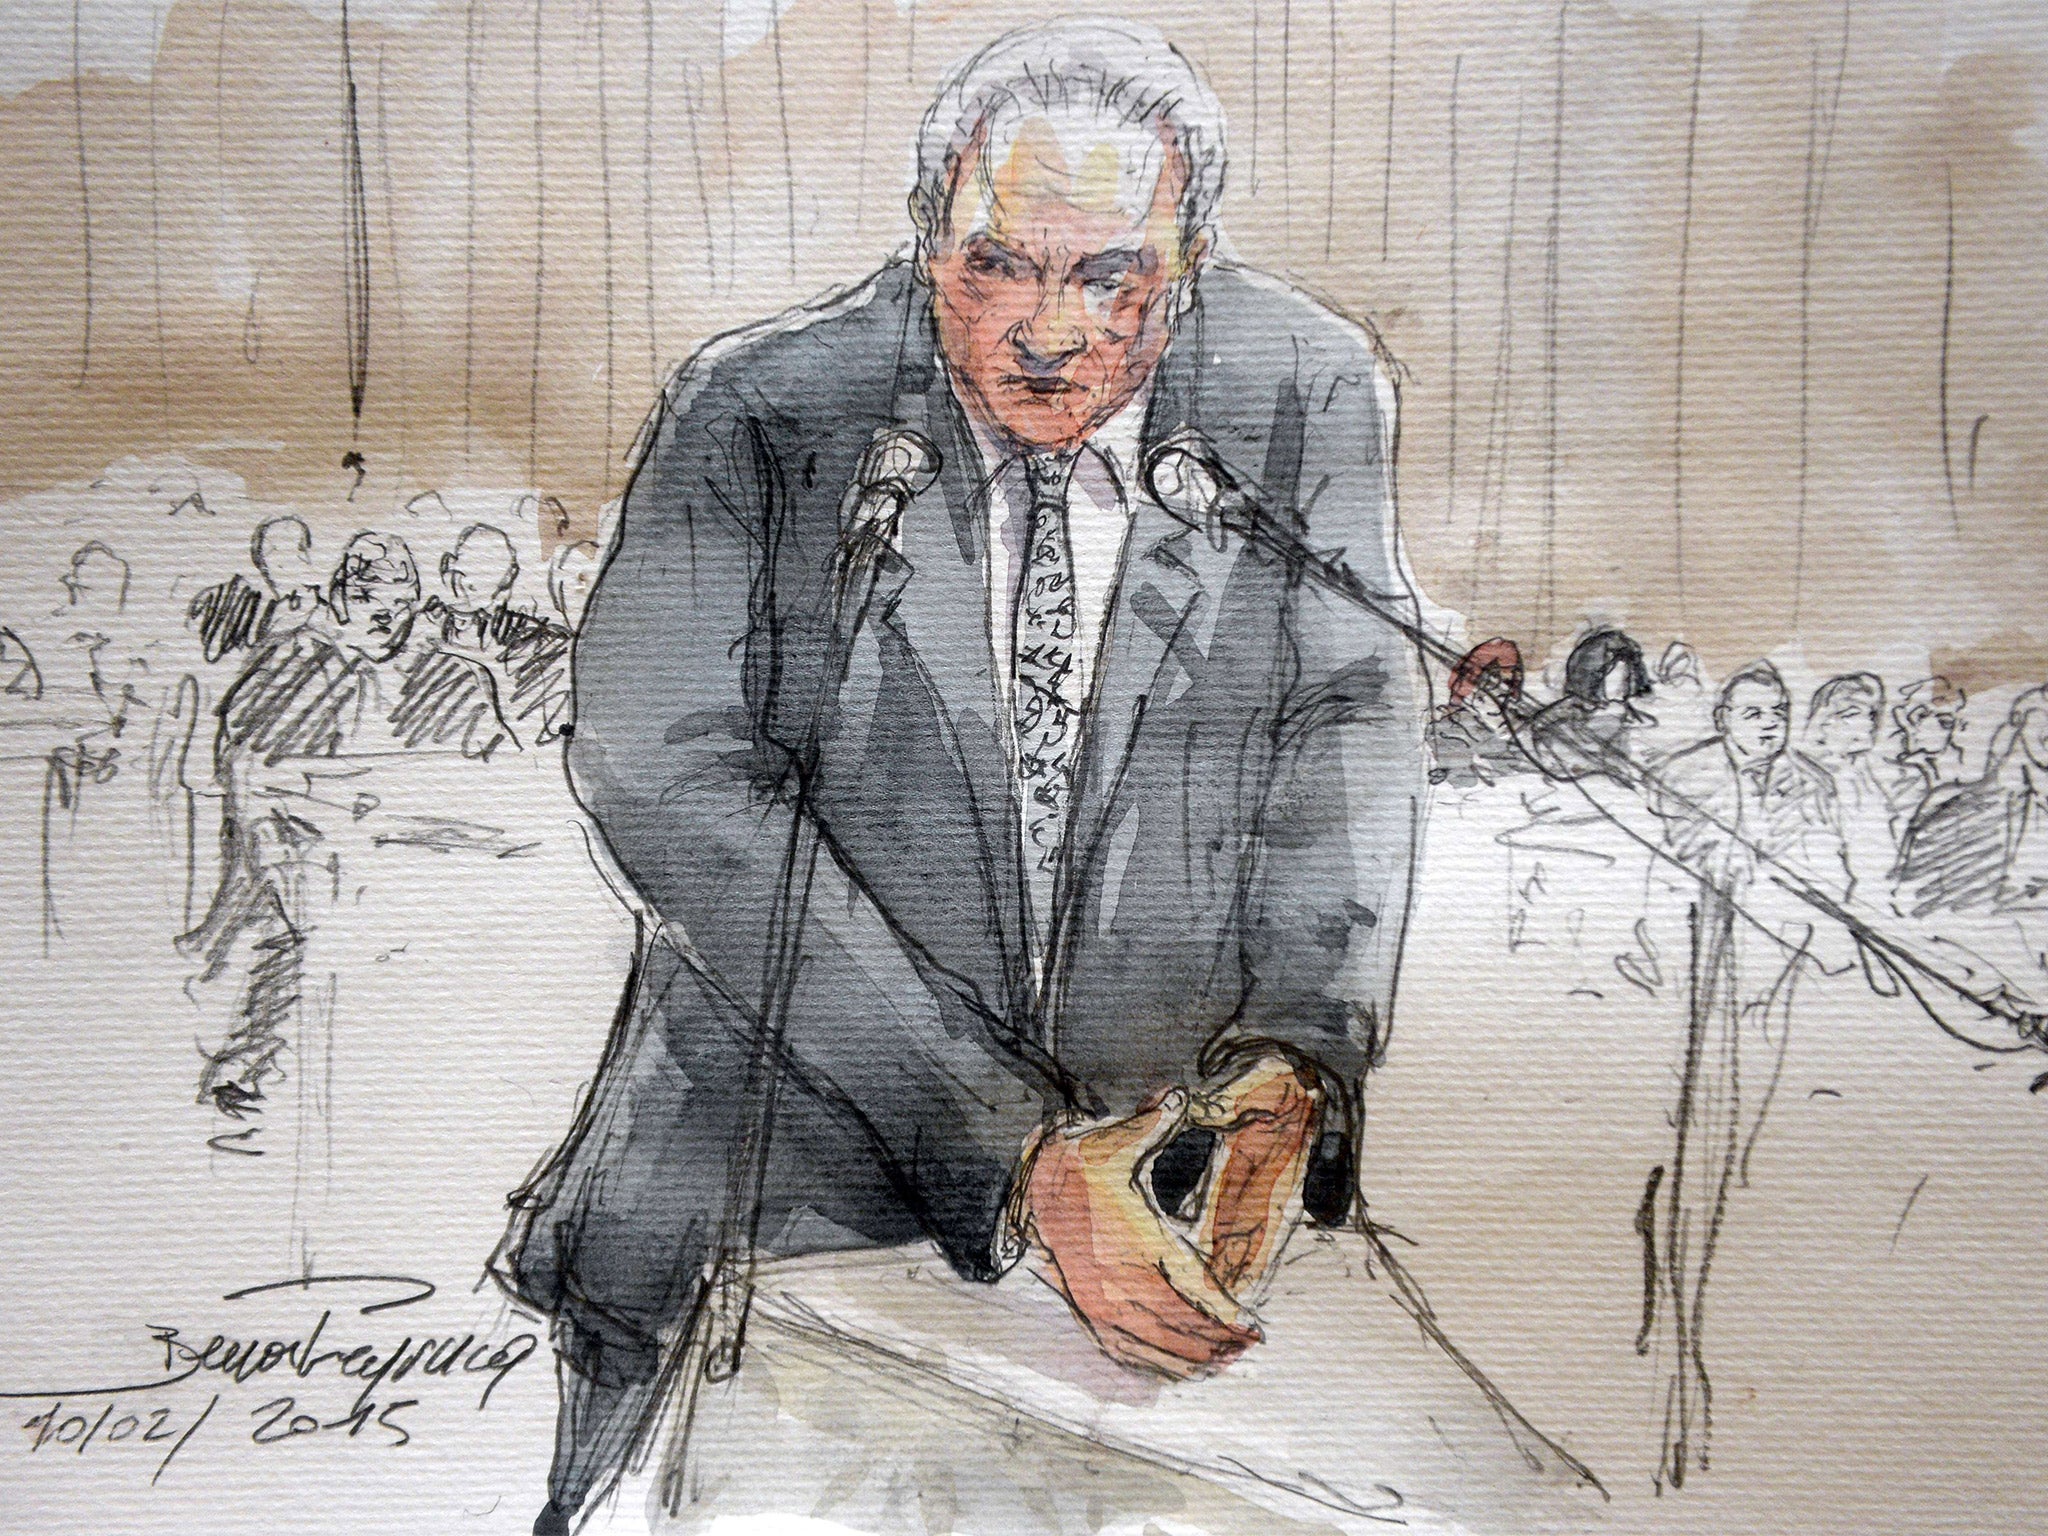 A court sketch of Dominique Strauss-Kahn testifying at Lille’s courthouse